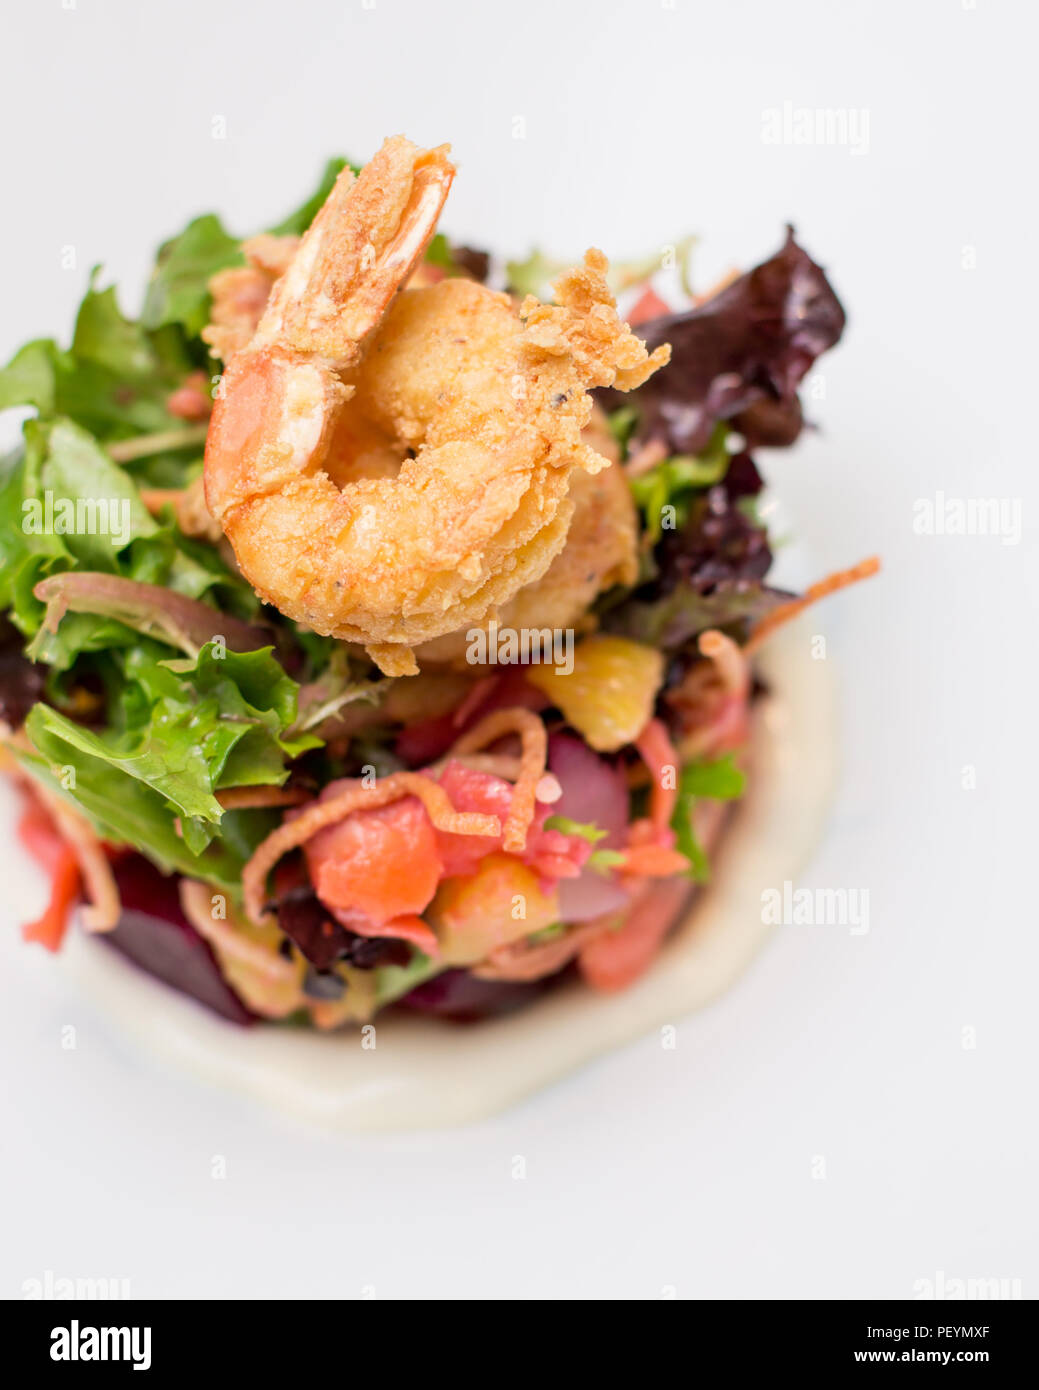 A prawn salad with beets on a white plate. Stock Photo